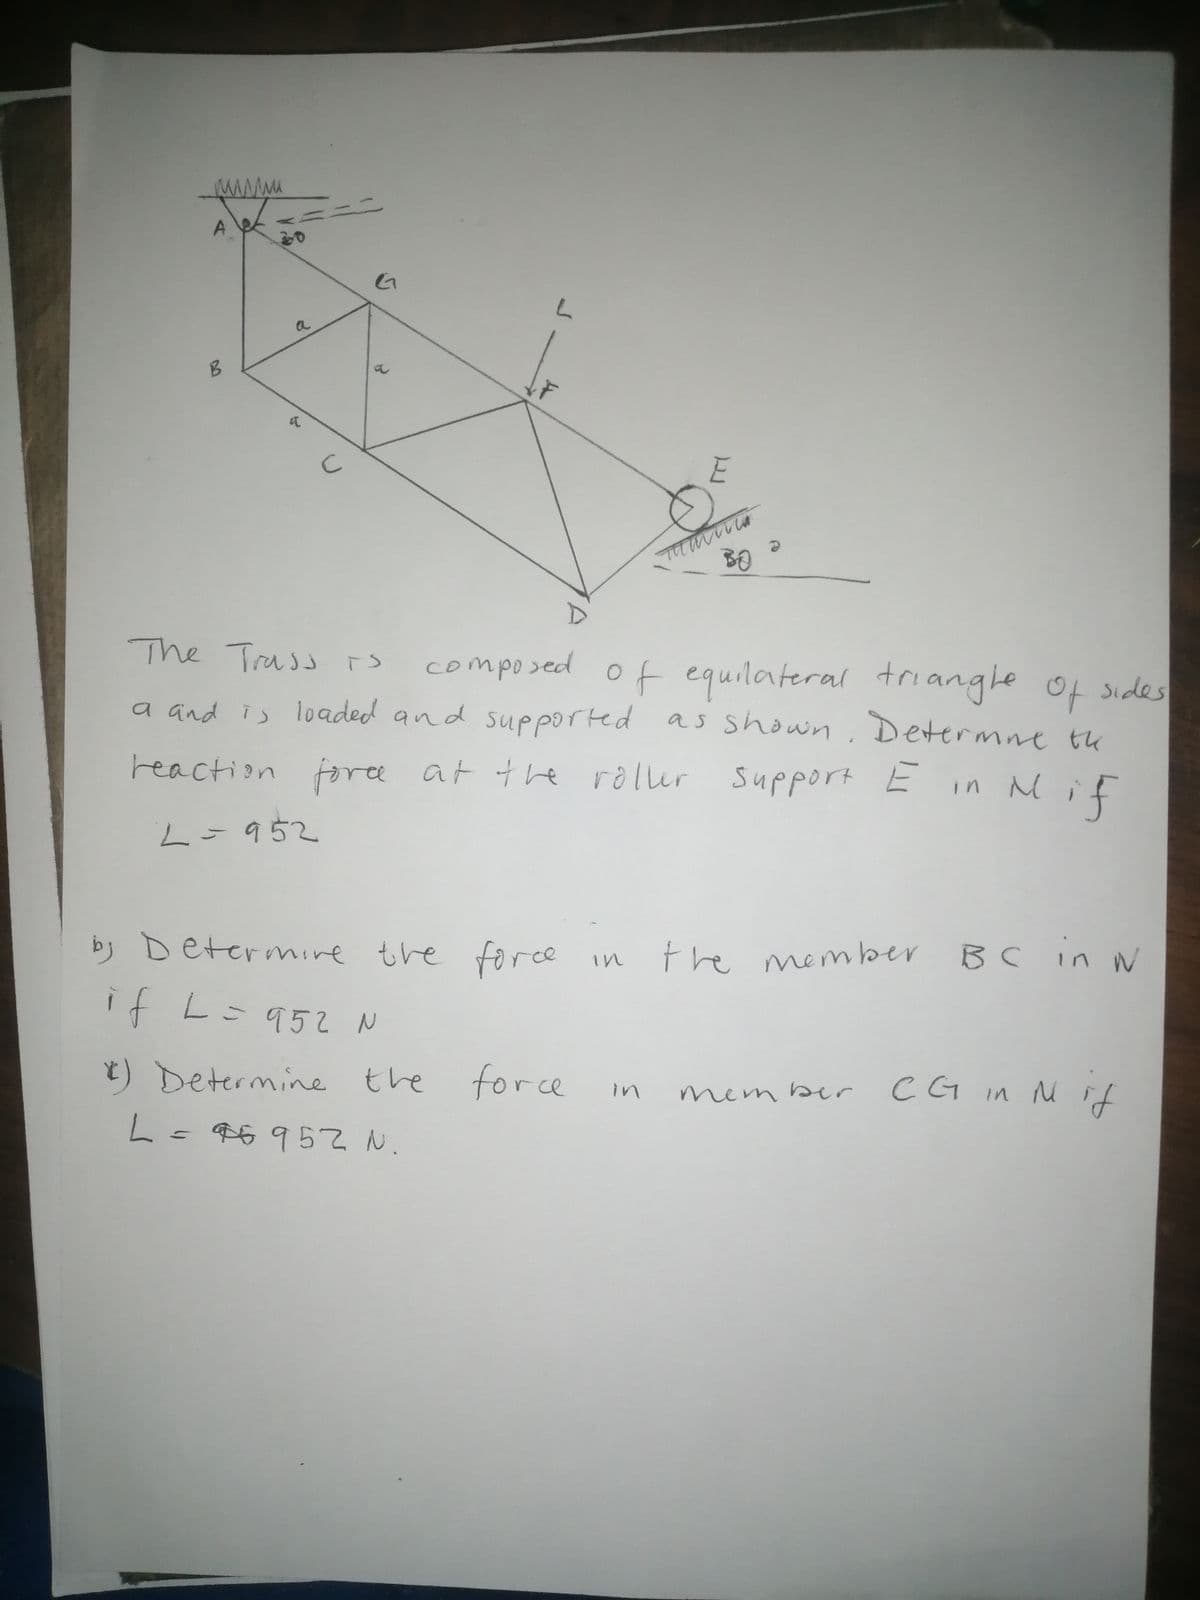 a
The Trassrs
composed of equilateral triangle of sides
a and is loaded and supported as shown, Determne tu
reaction foree at the roller support E
in Mif
L=952
by Determire the
force
the member
BC in
in
if L- 95て
) Determine
the for ce
C G in M if
in
mem ber
L=96952 N.
